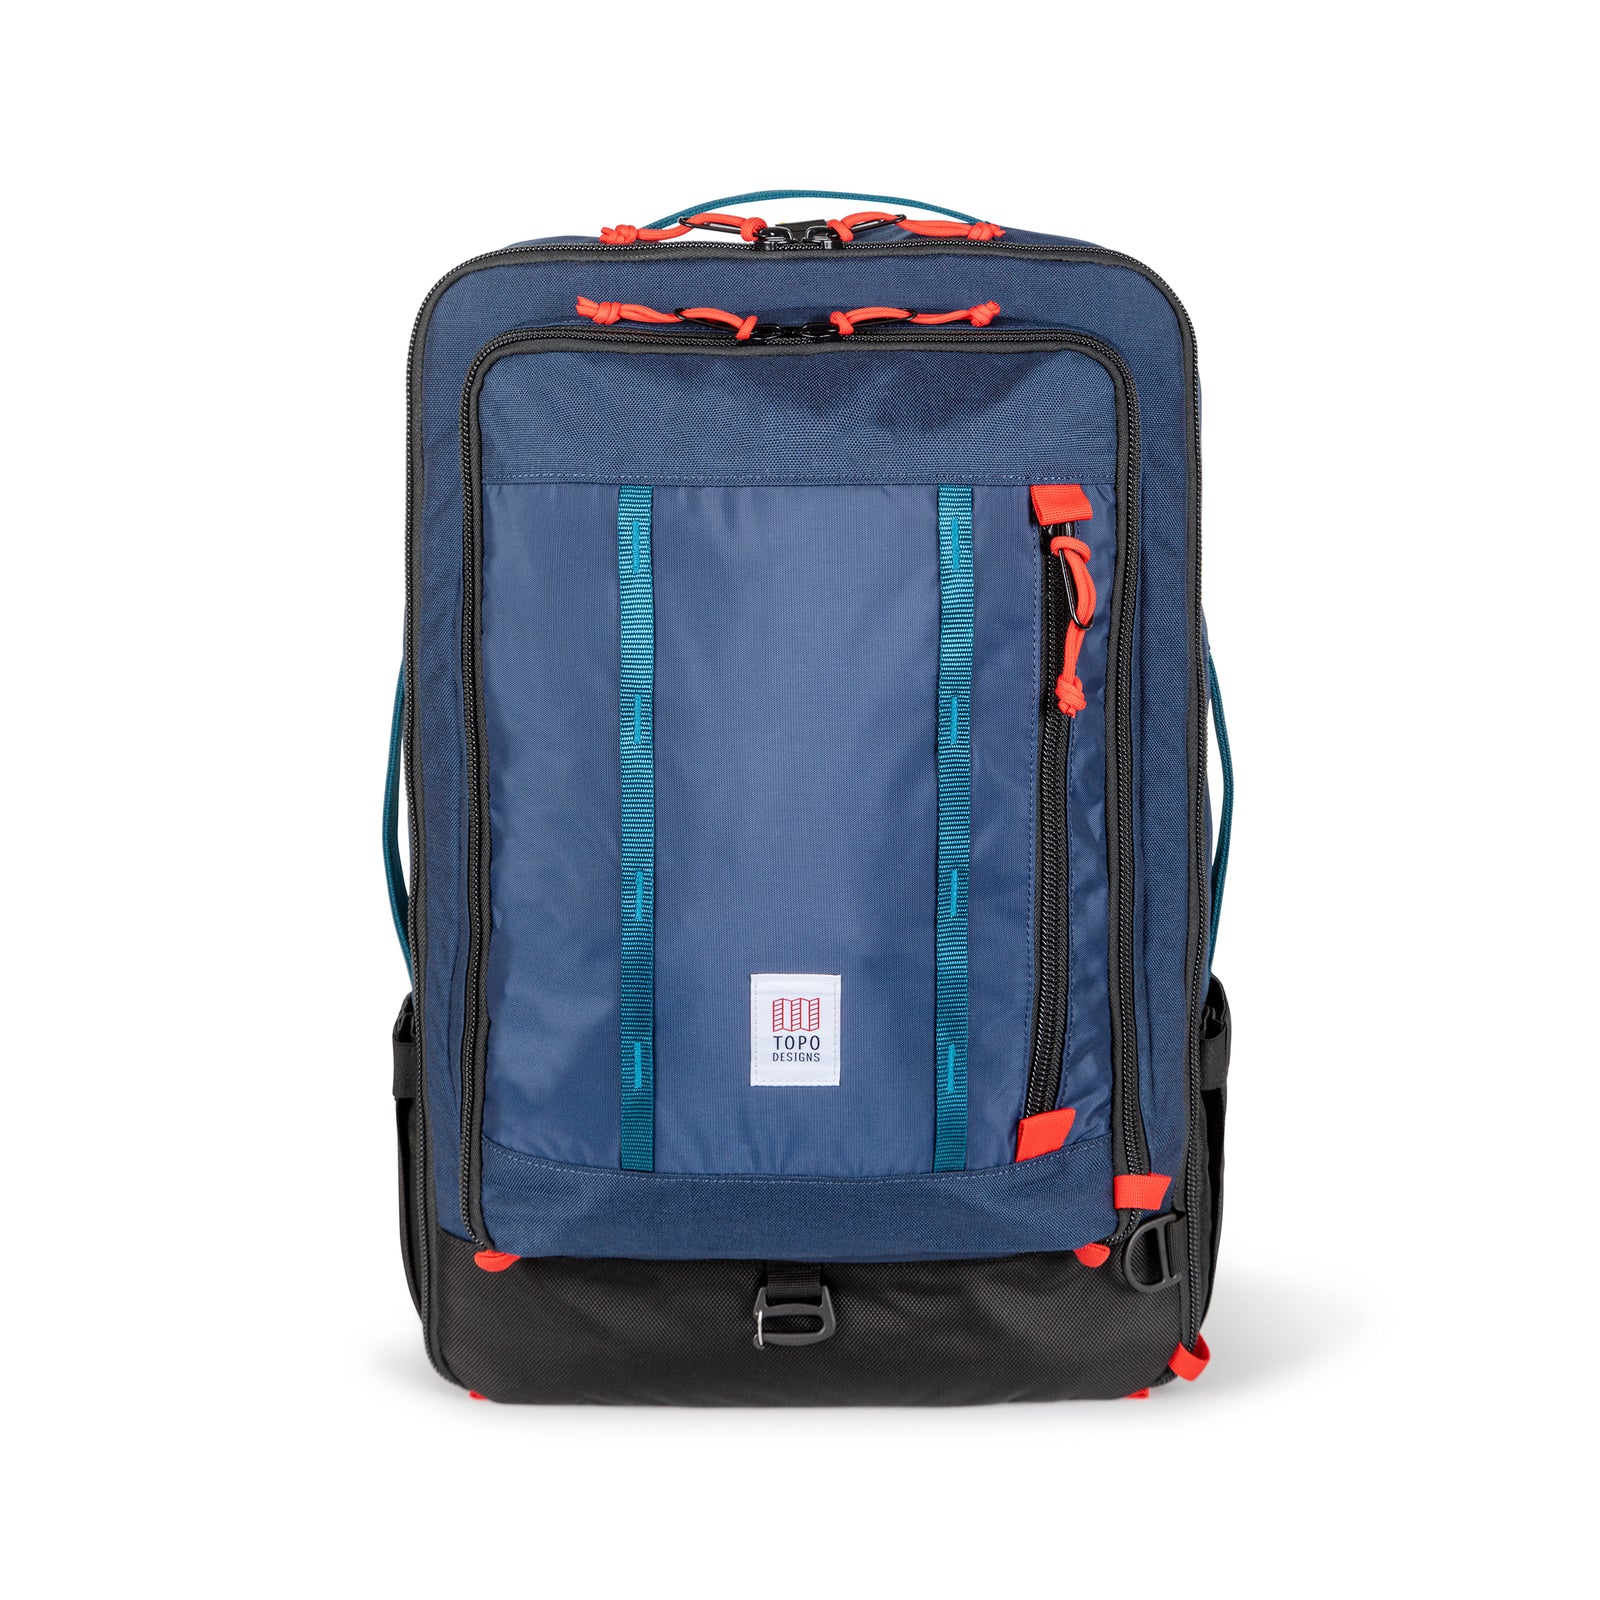 Topo Designs Global Travel Bag 40L Durable Carry On Convertible Laptop Travel Backpack in "Navy" blue.